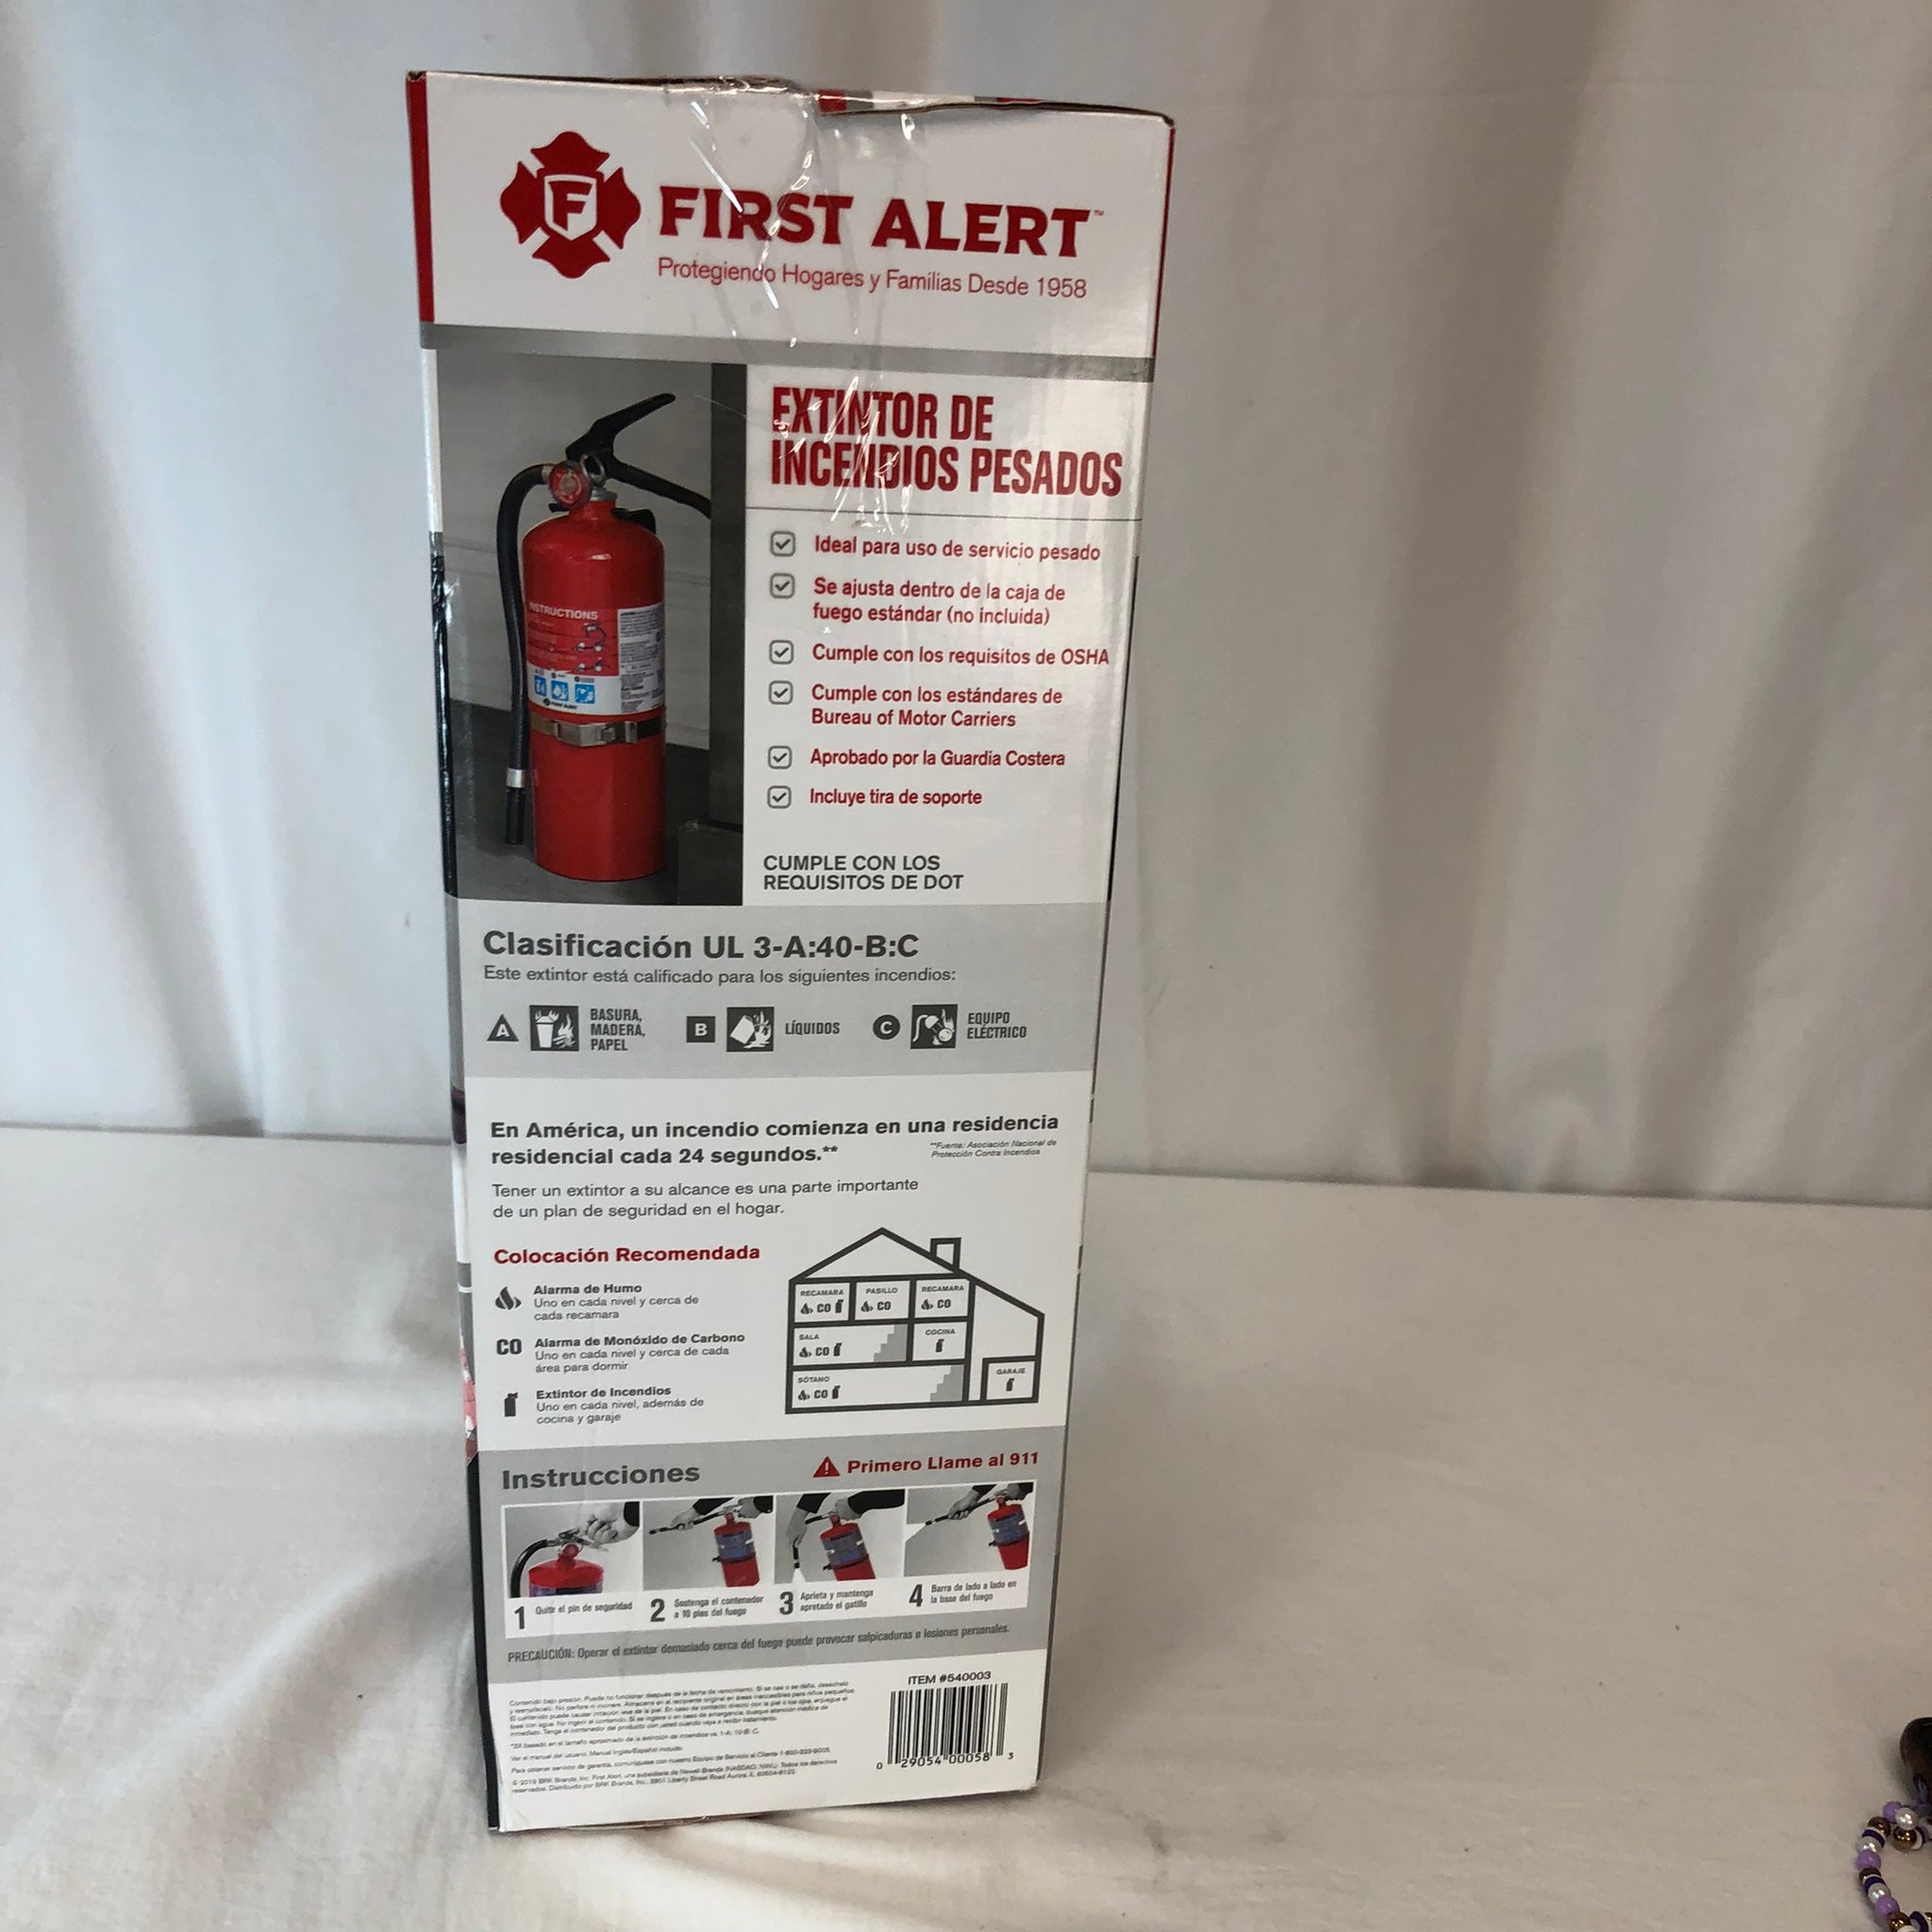 First Alert Heavy Duty Professional Grade Fire Extinguisher, 5 lbs